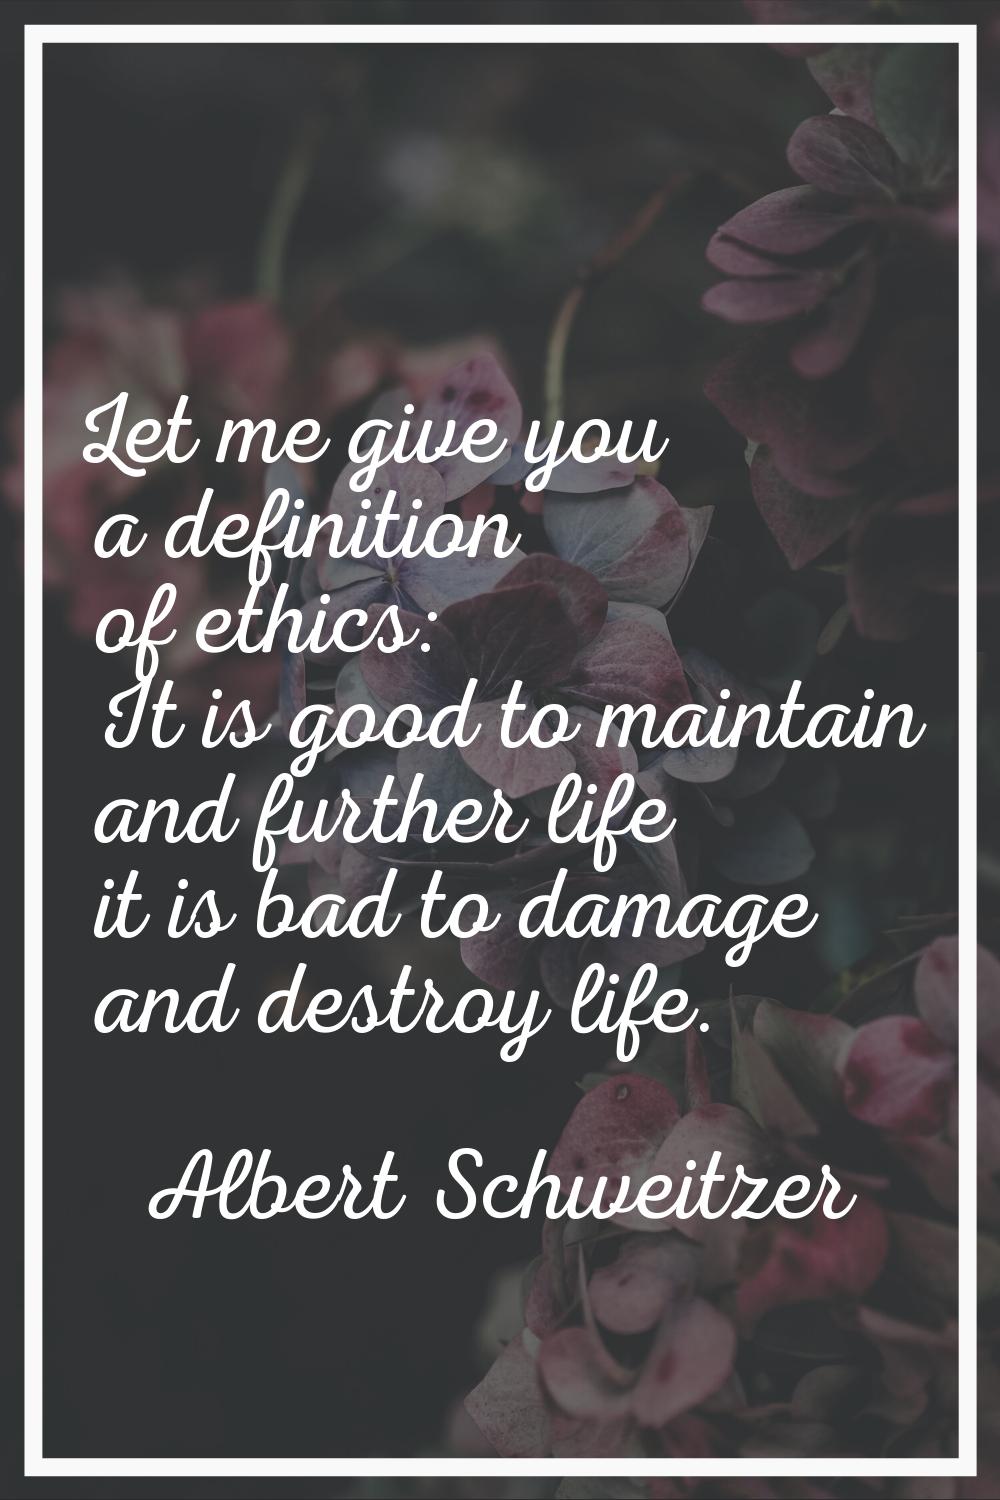 Let me give you a definition of ethics: It is good to maintain and further life it is bad to damage